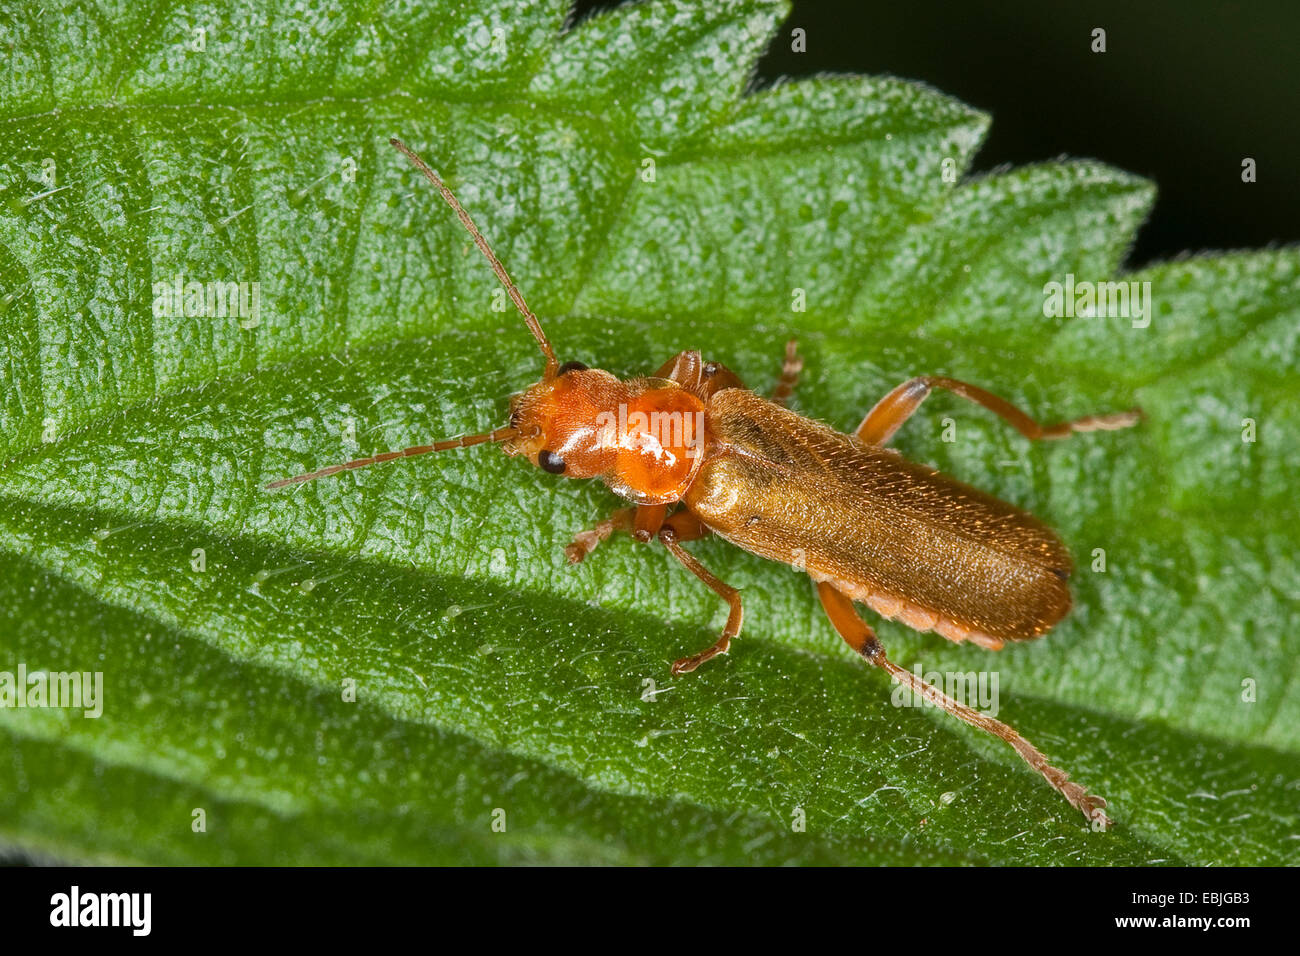 Soldier Beetle (Cantharis cryptica), sitting on a leaf, Germany Stock Photo